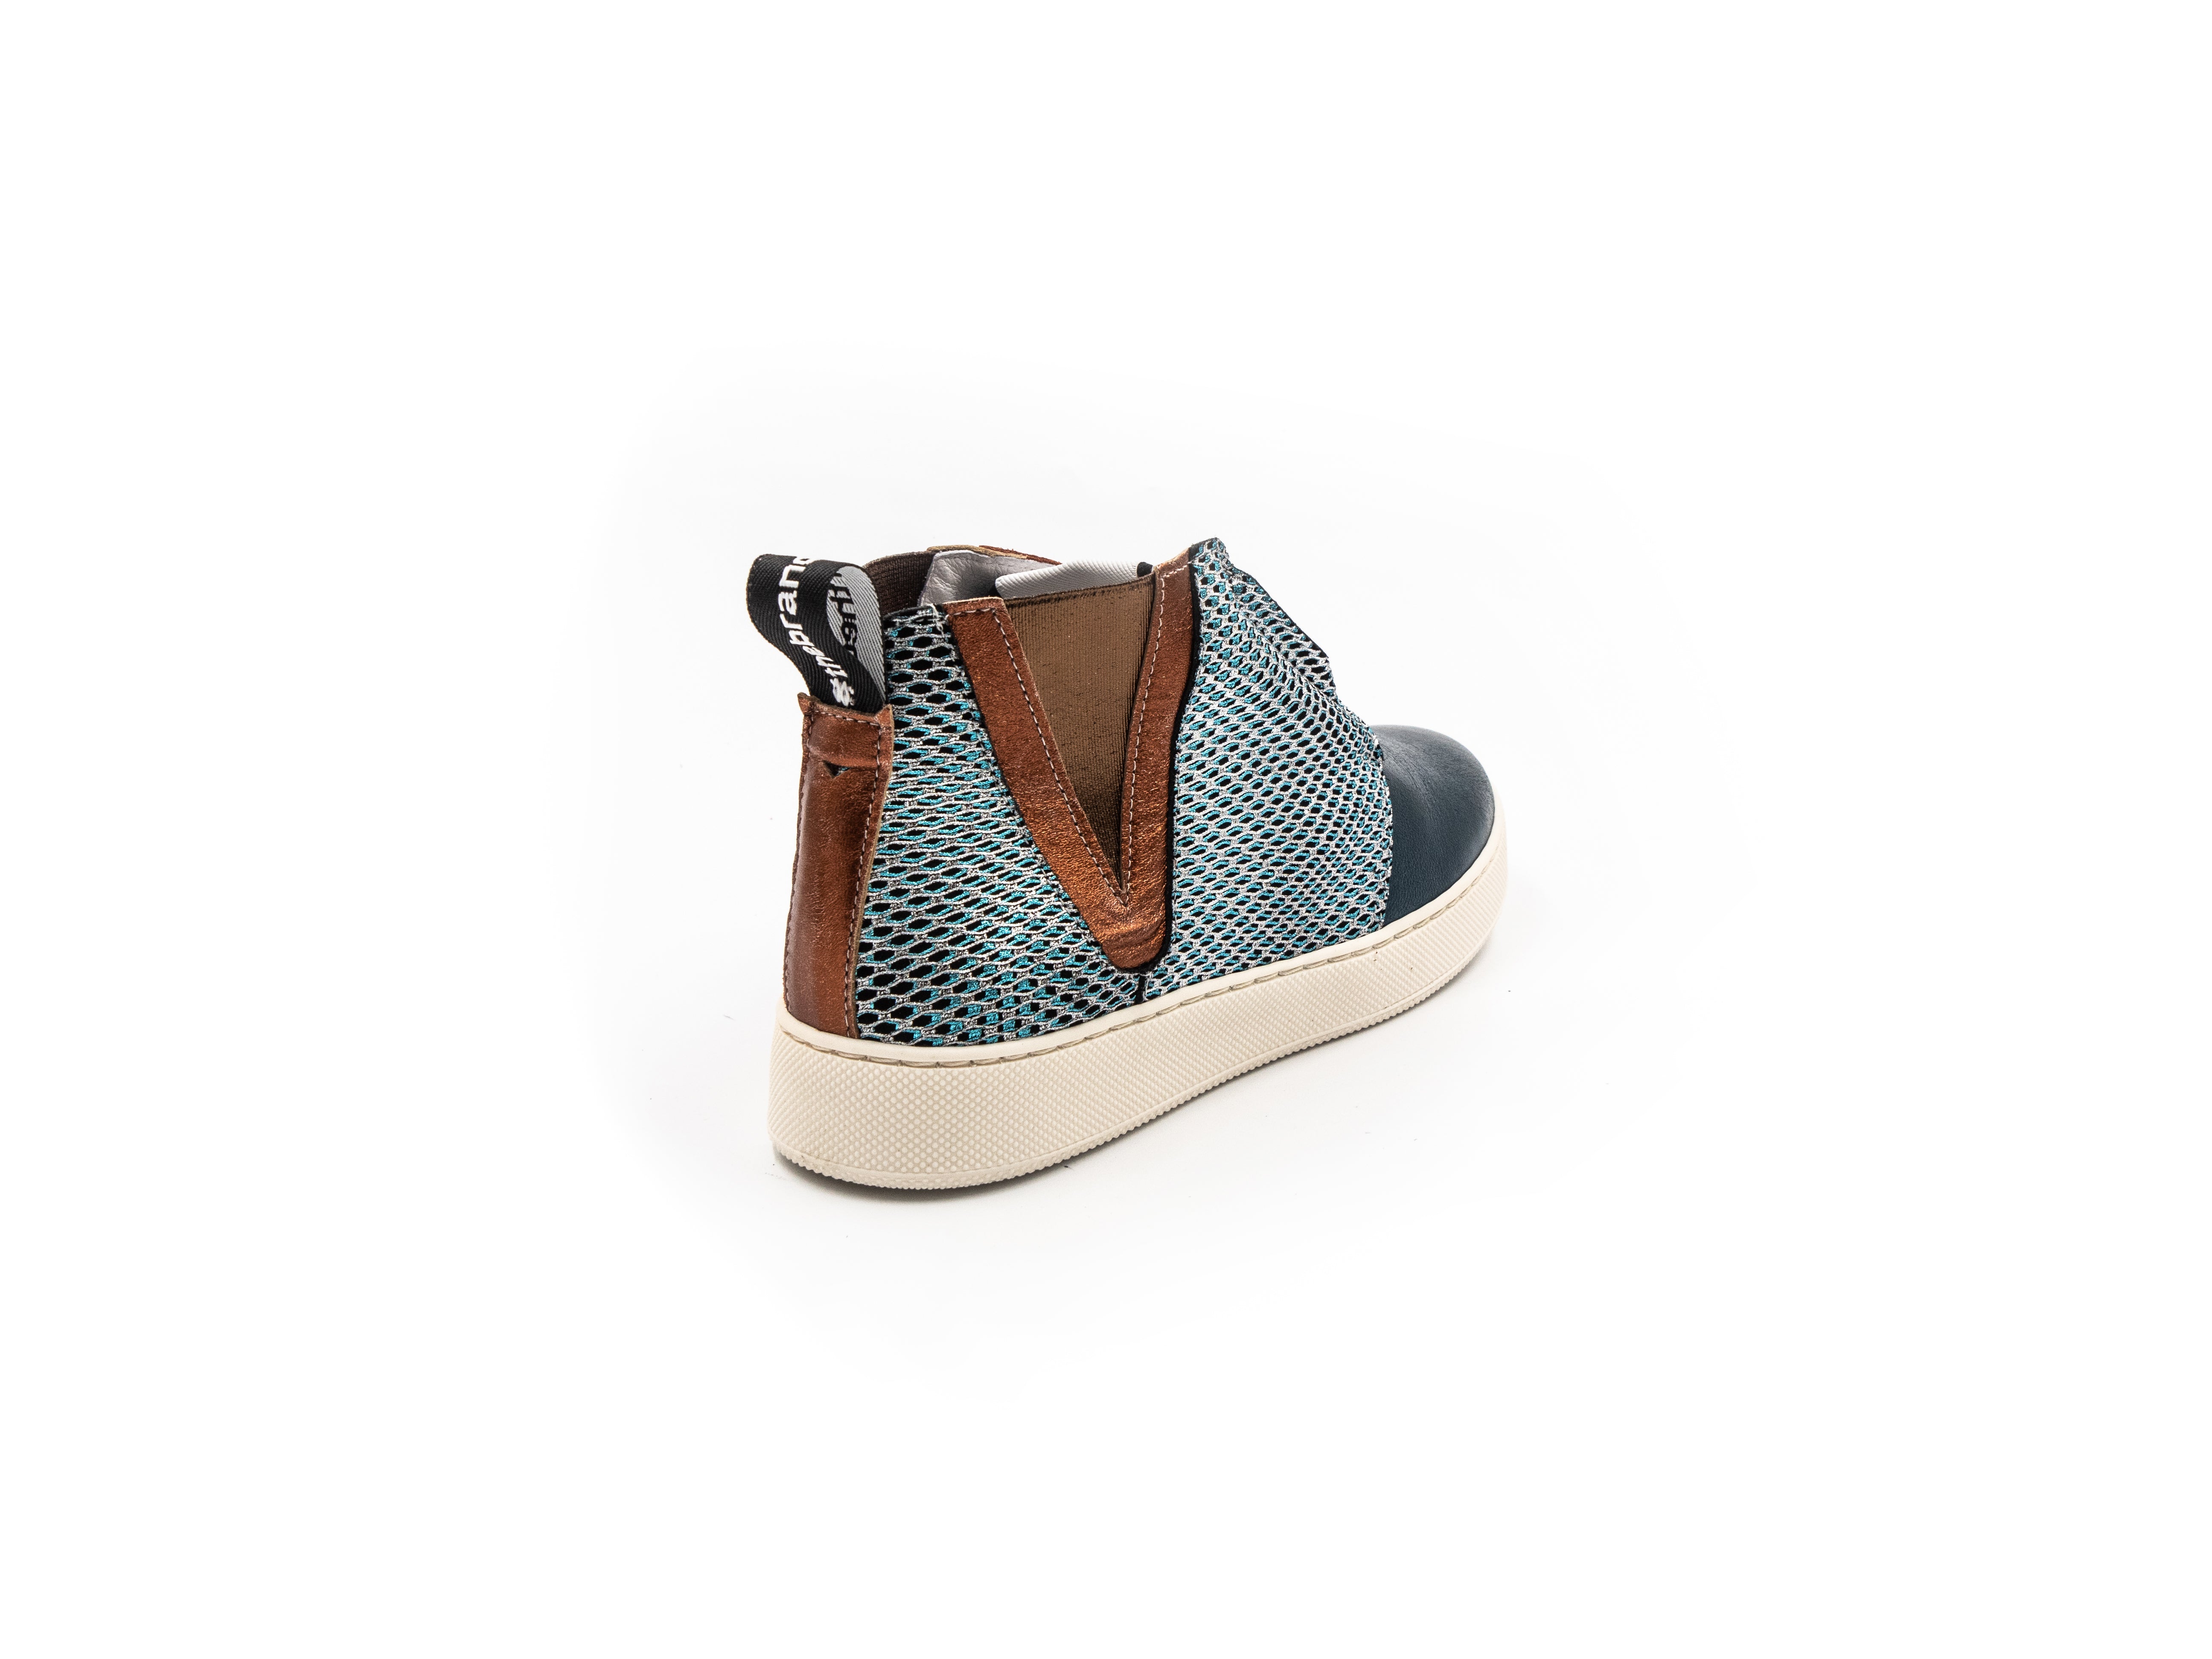 Sneakers without laces in shades of blue and brown. 